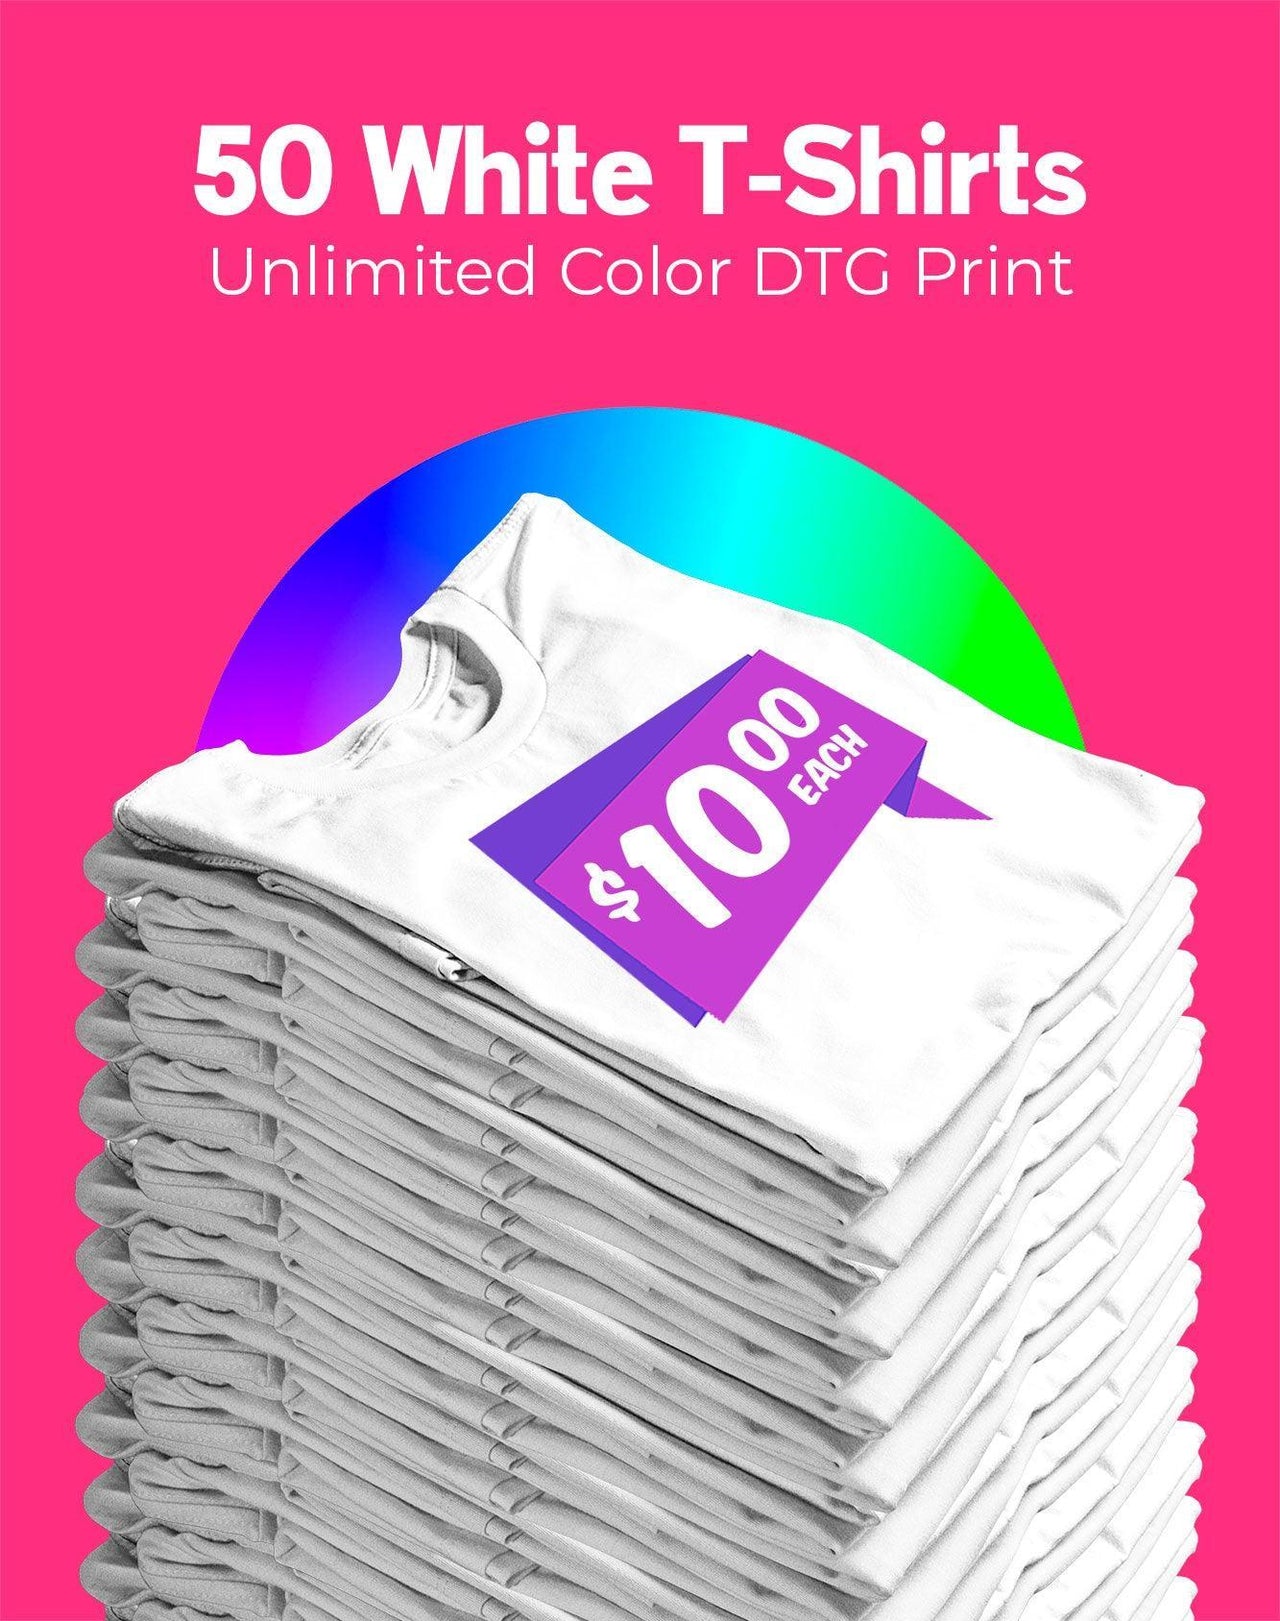 50 White DTG T-Shirts - Constantly Create Shop